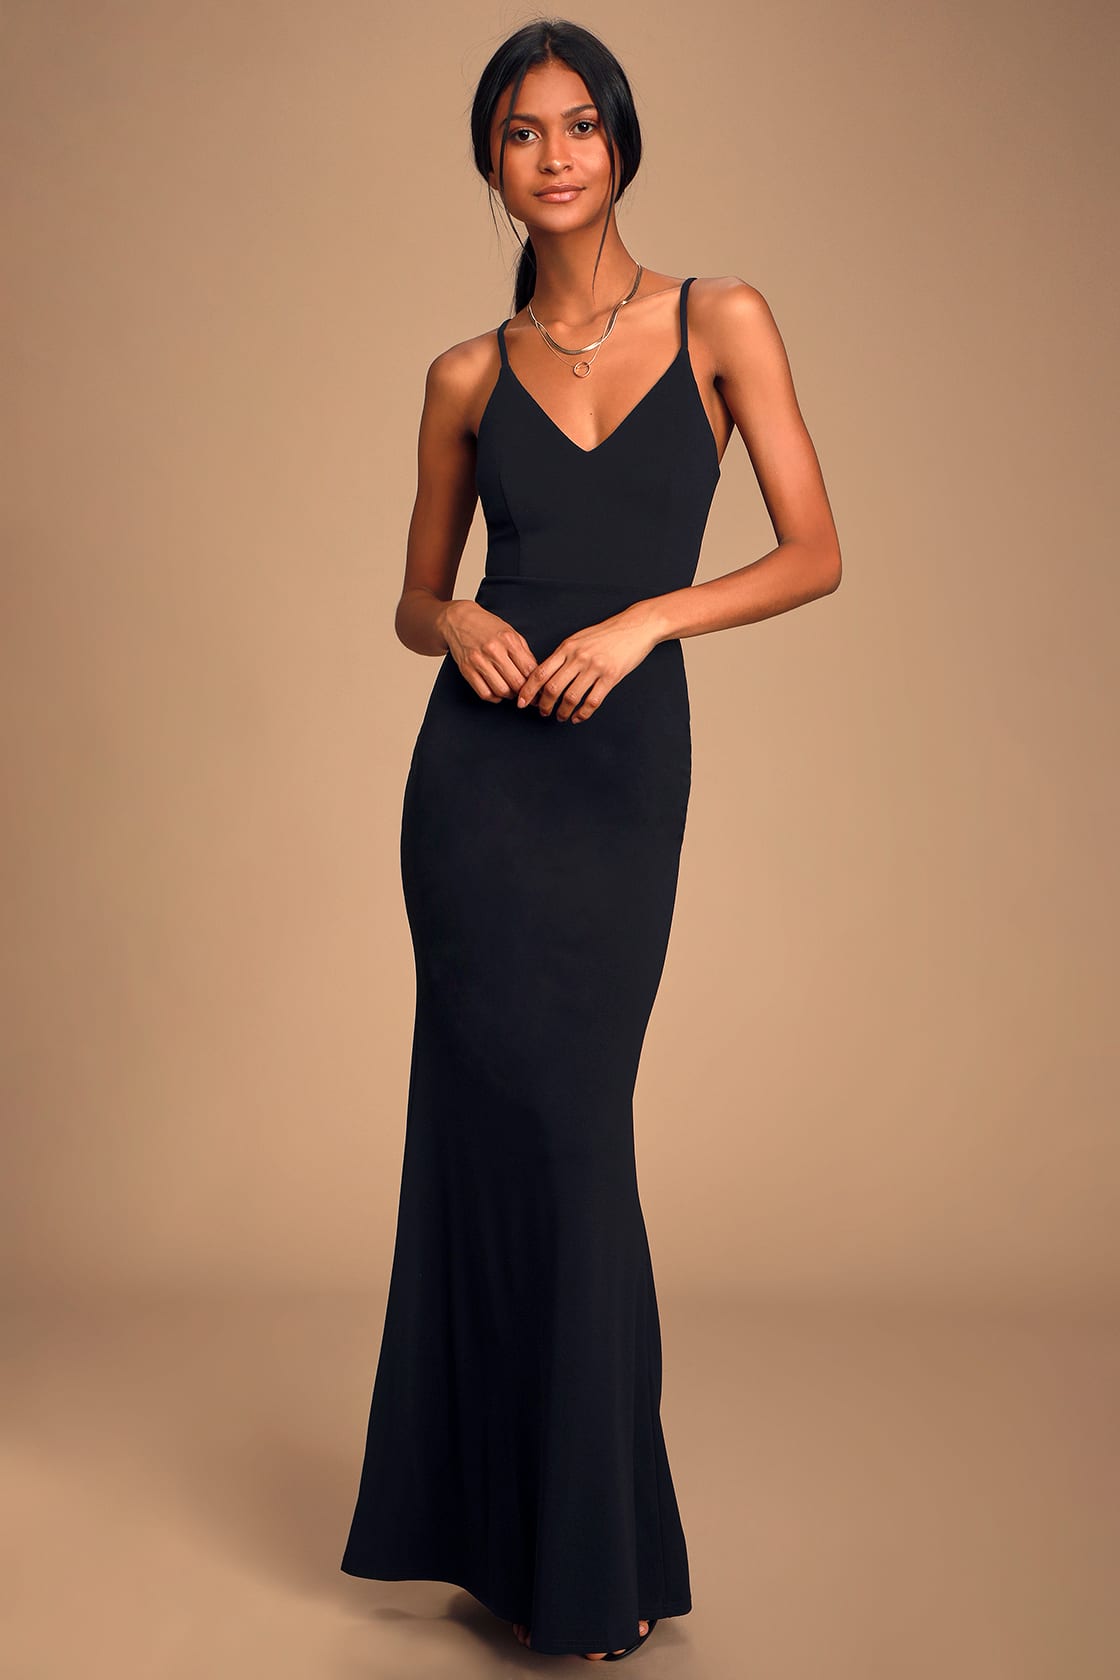 What's Your Prom Personality? Take Our Prom Dresses Quiz and Find Out! -  Lulus.com Fashion Blog